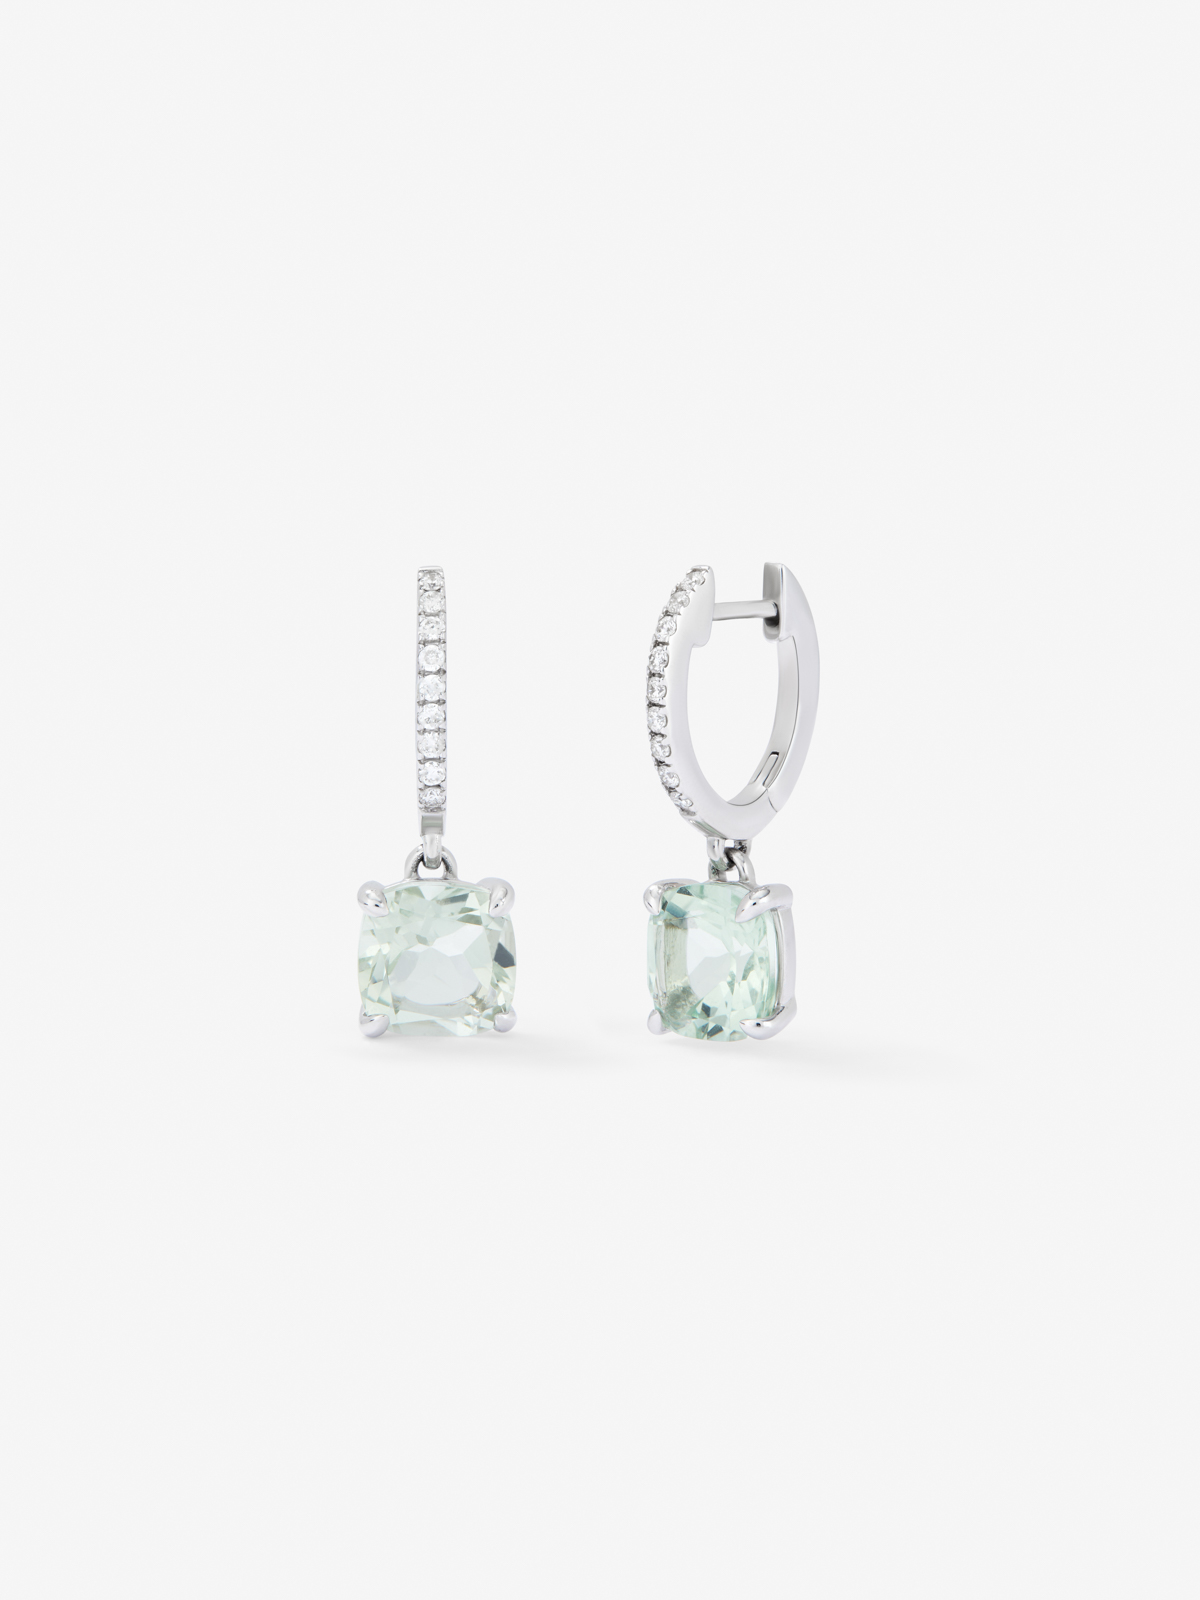 18K White Gold Aro Earrings with Green Ameatist 3.27 CTS and 0.14 CTS diamonds